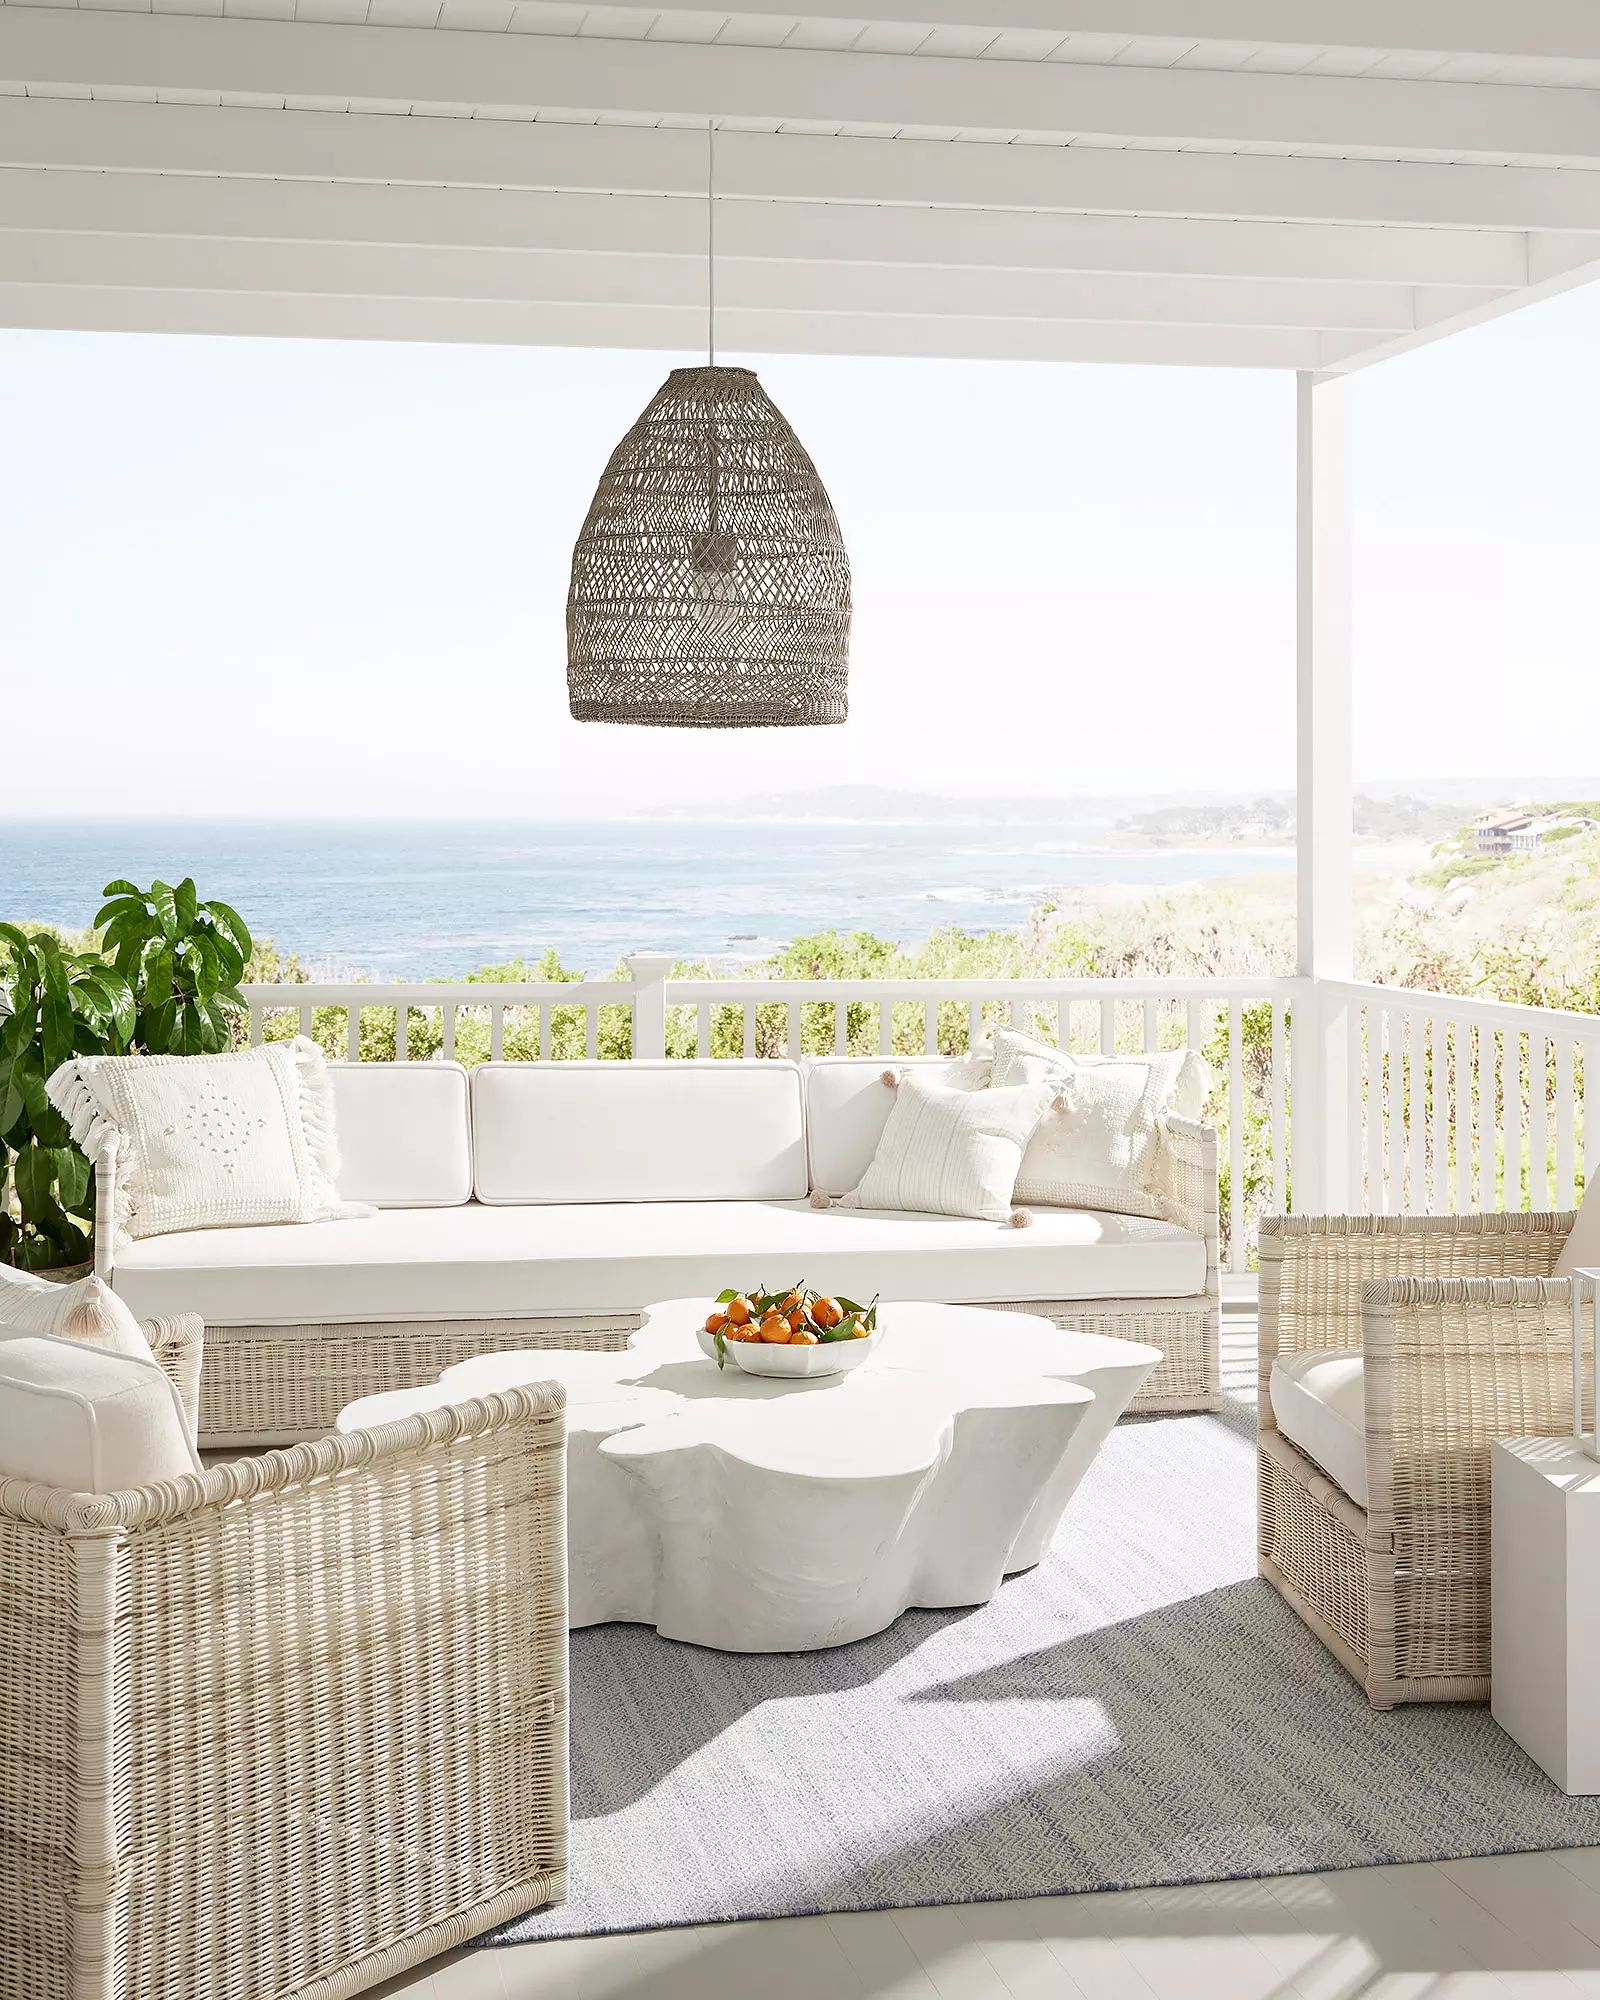 Pacifica Sofa - Driftwood | Serena and Lily